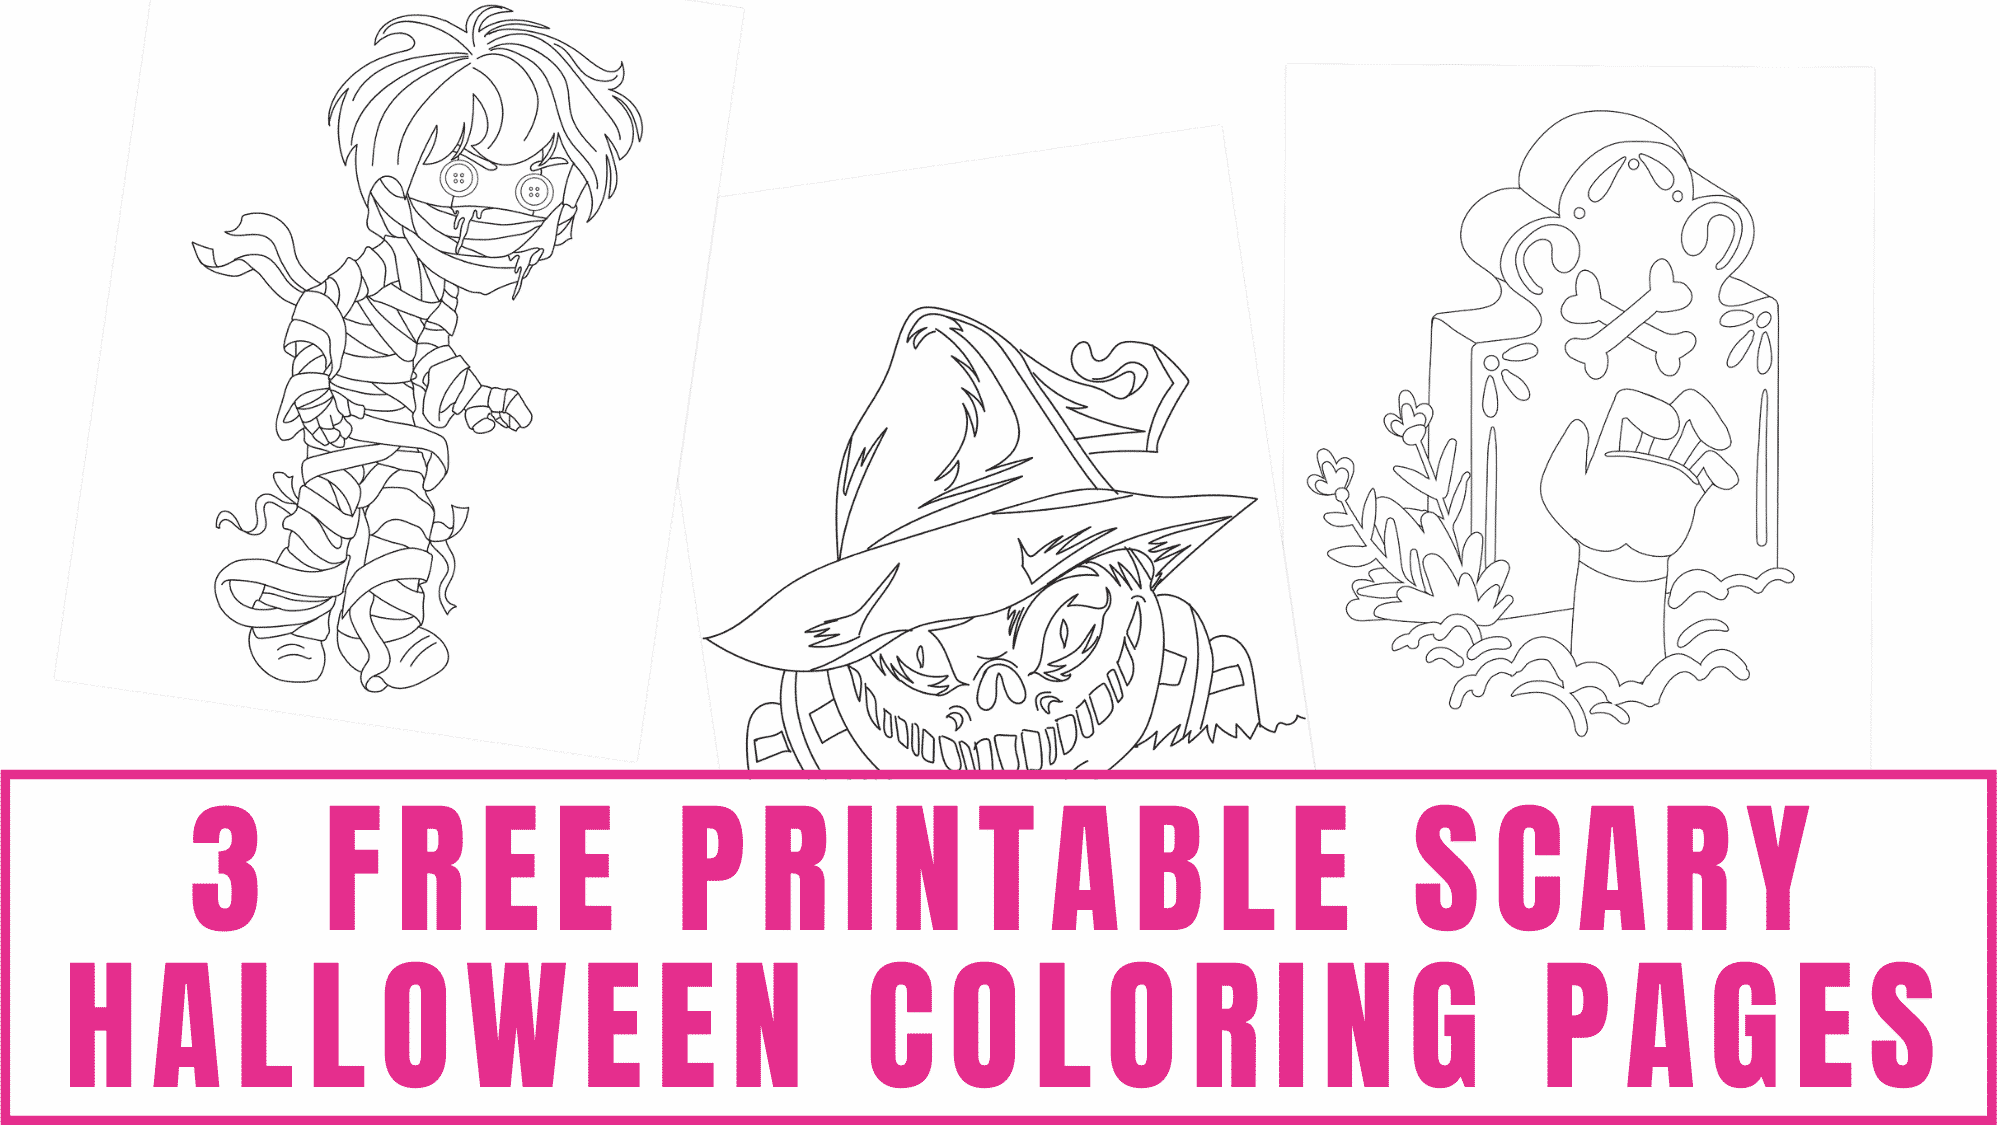 Free printable scary halloween coloring pages